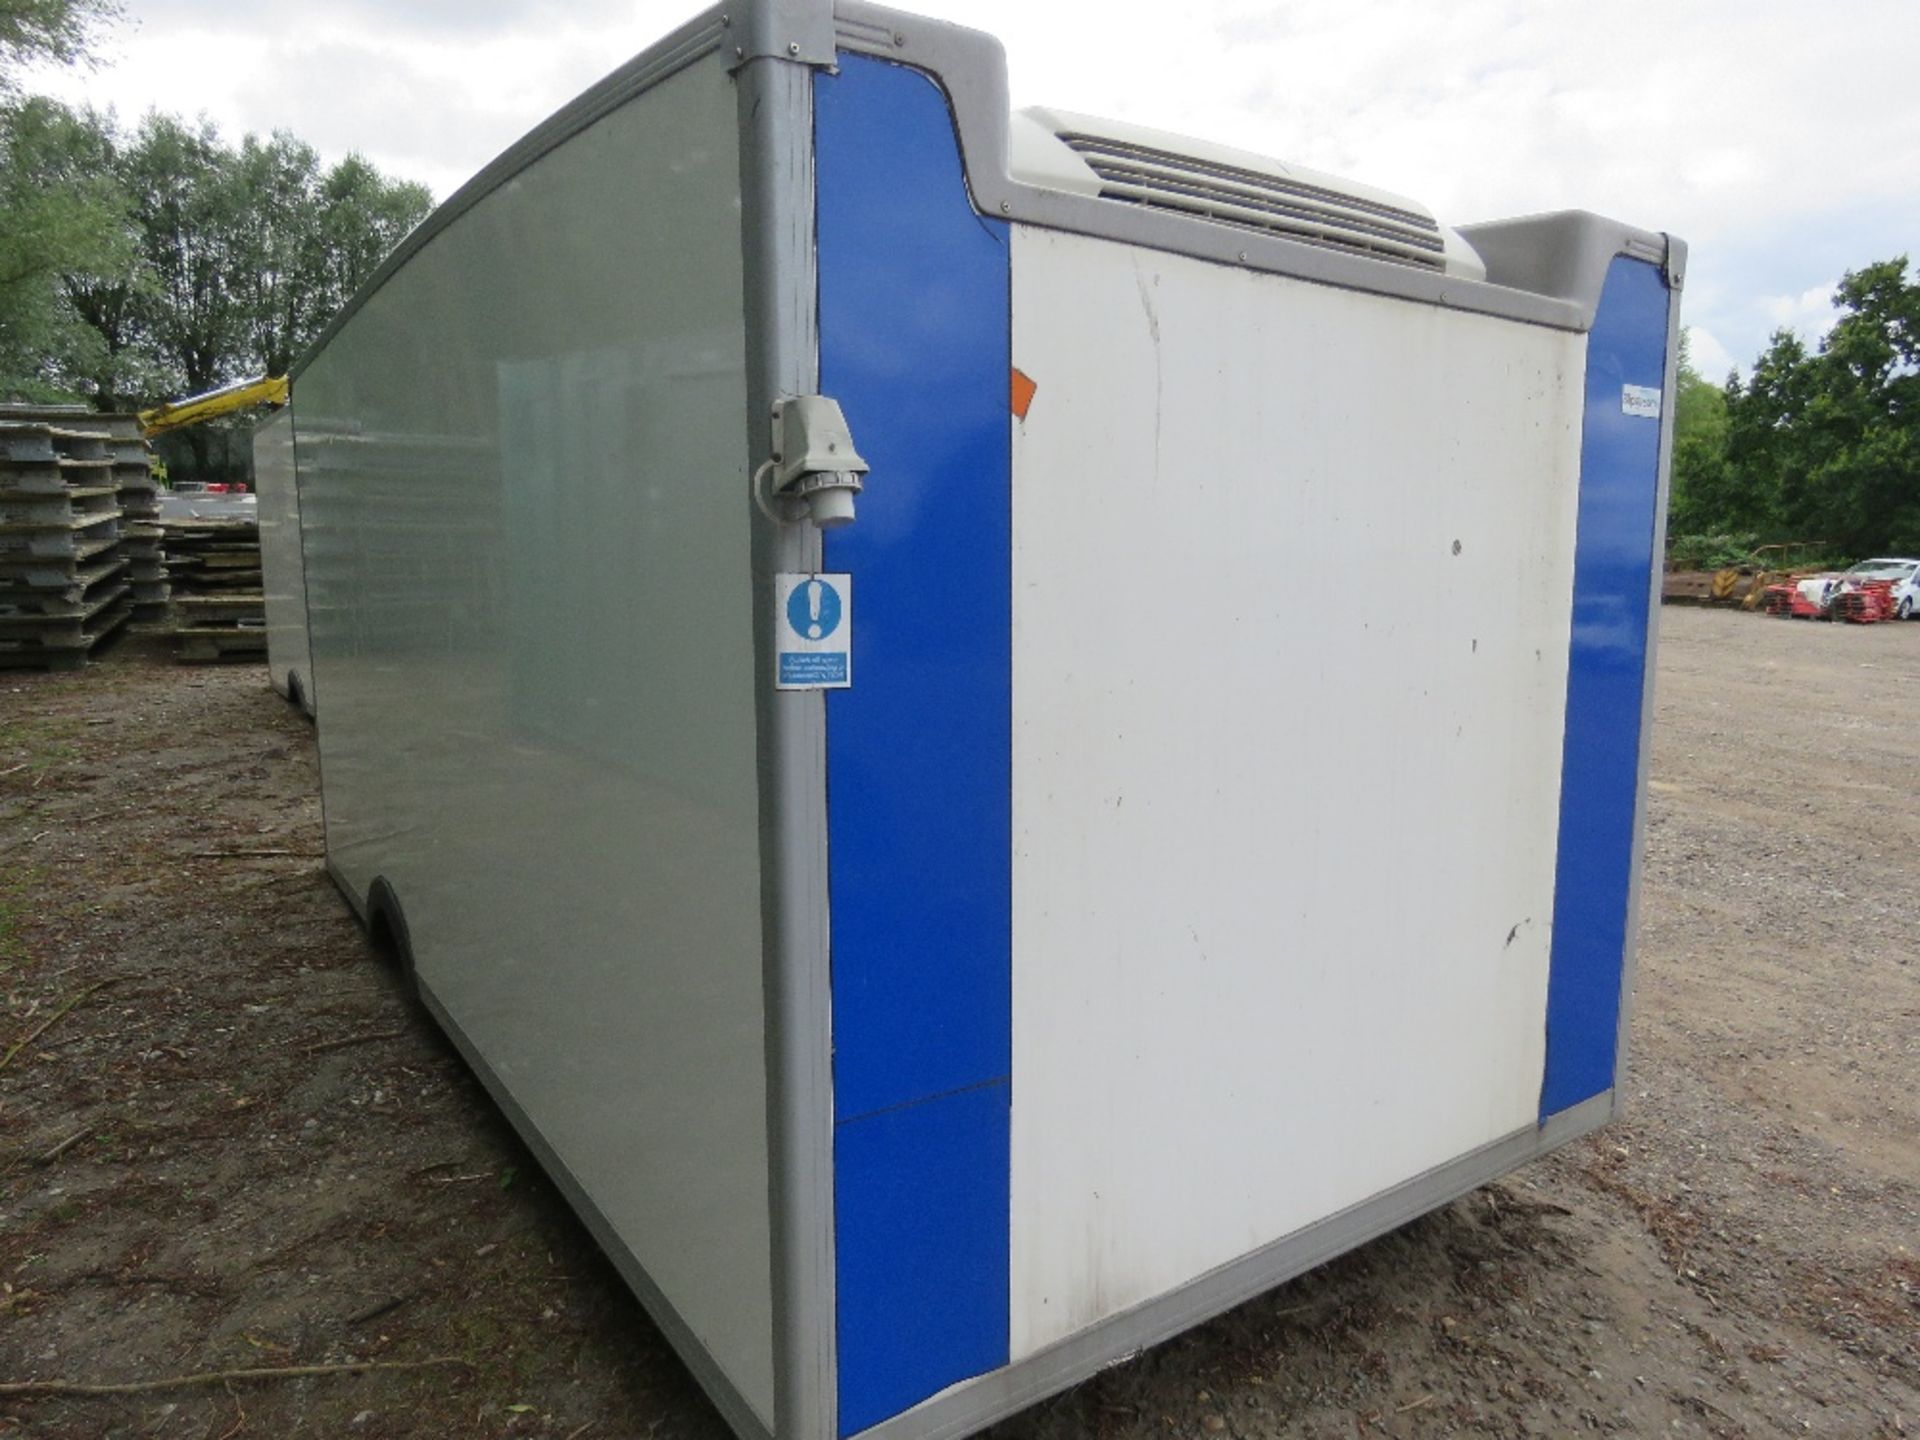 TEMPERATURE CONTROLLED VAN BODY WITH ROLLER SHUTTER SIDES, 13FT LENGTH APPROX. - Image 4 of 8